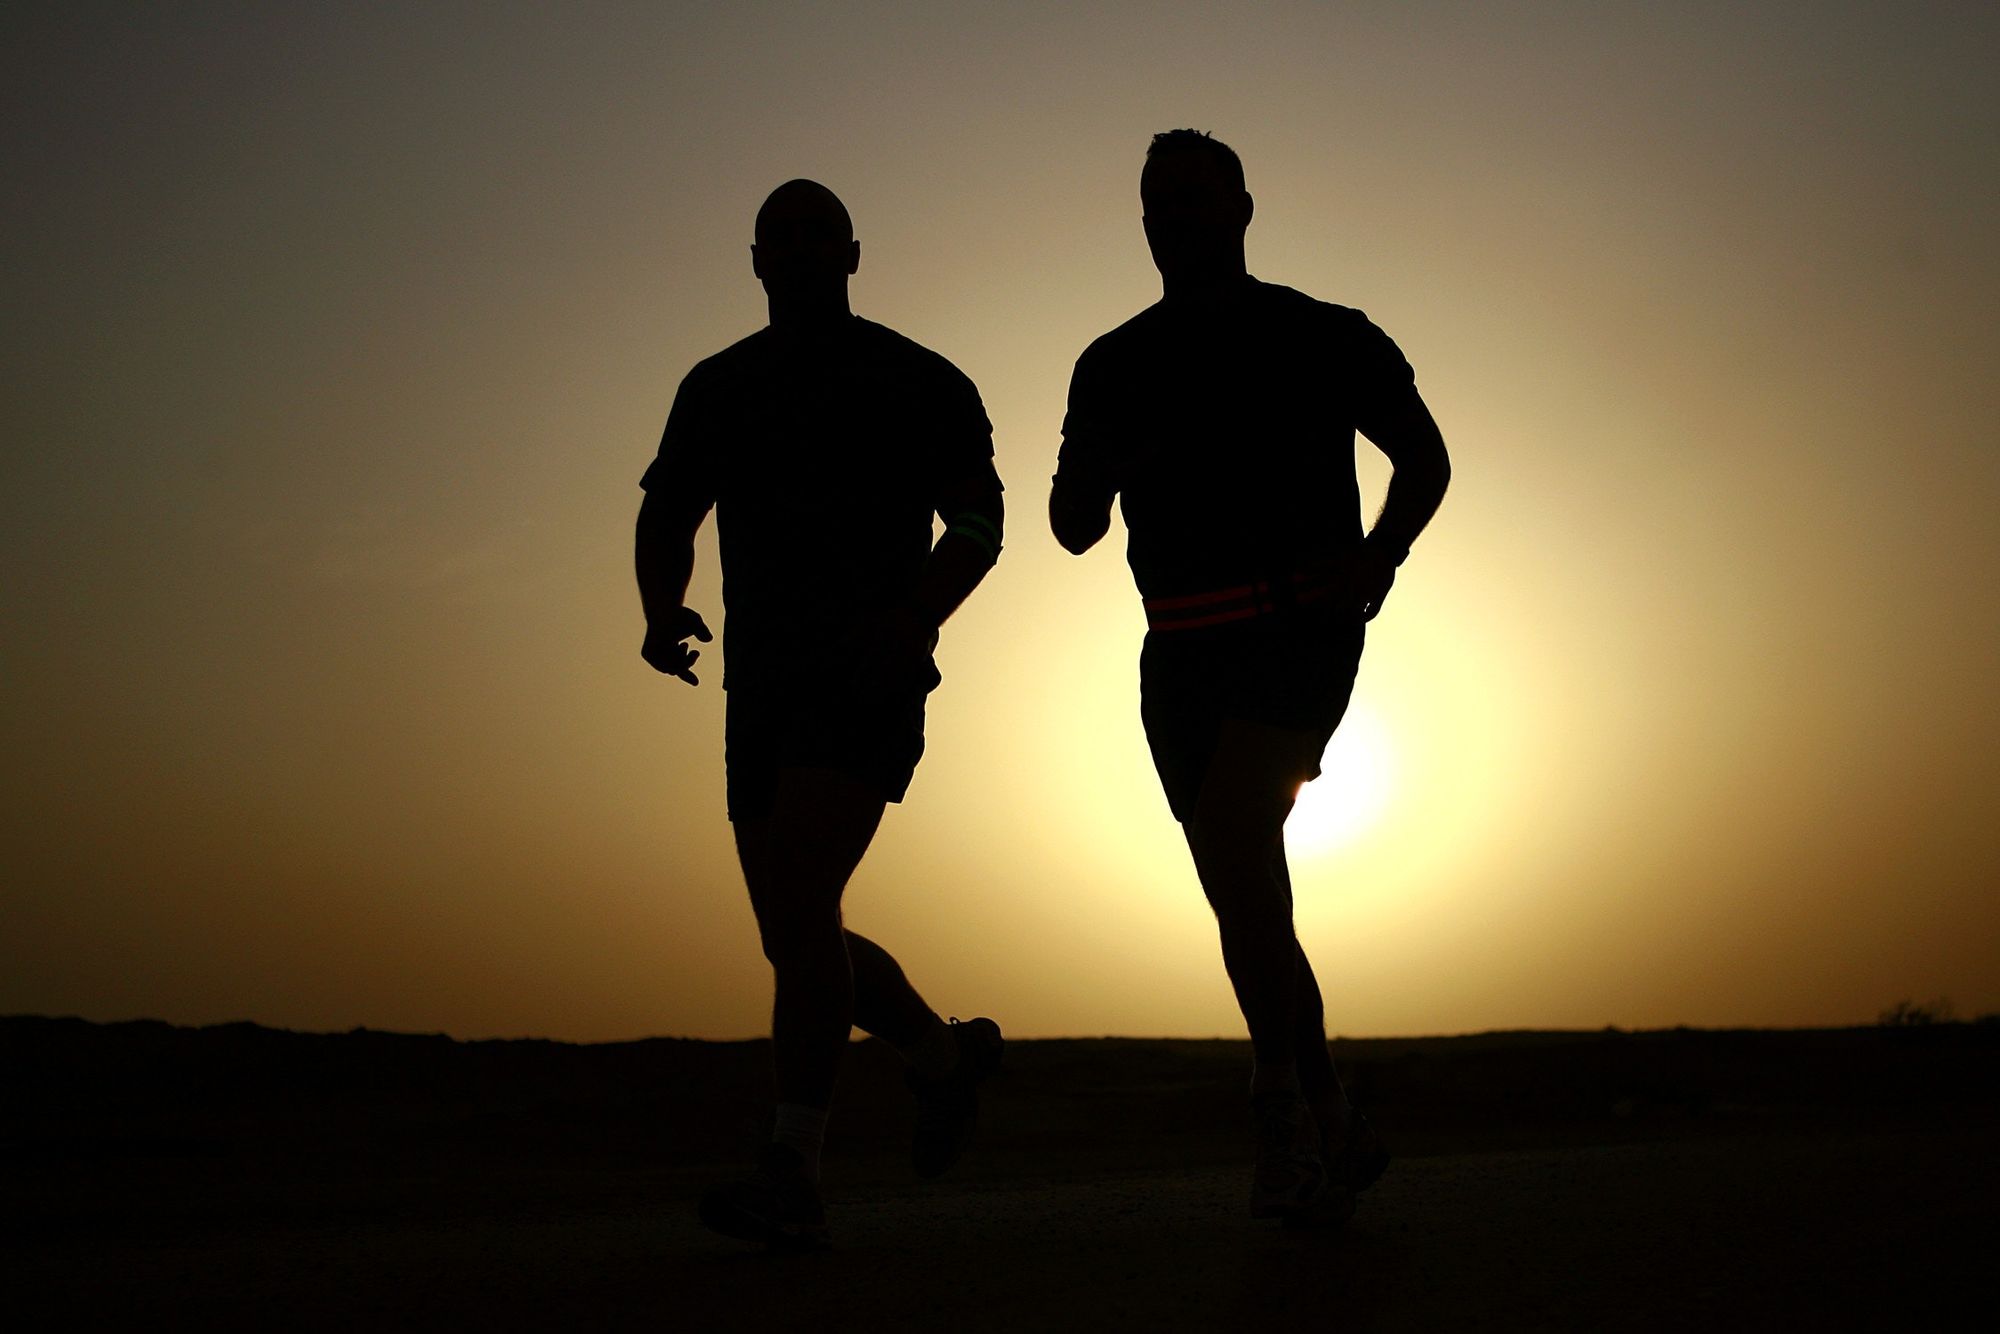 two men jogging in the sunset